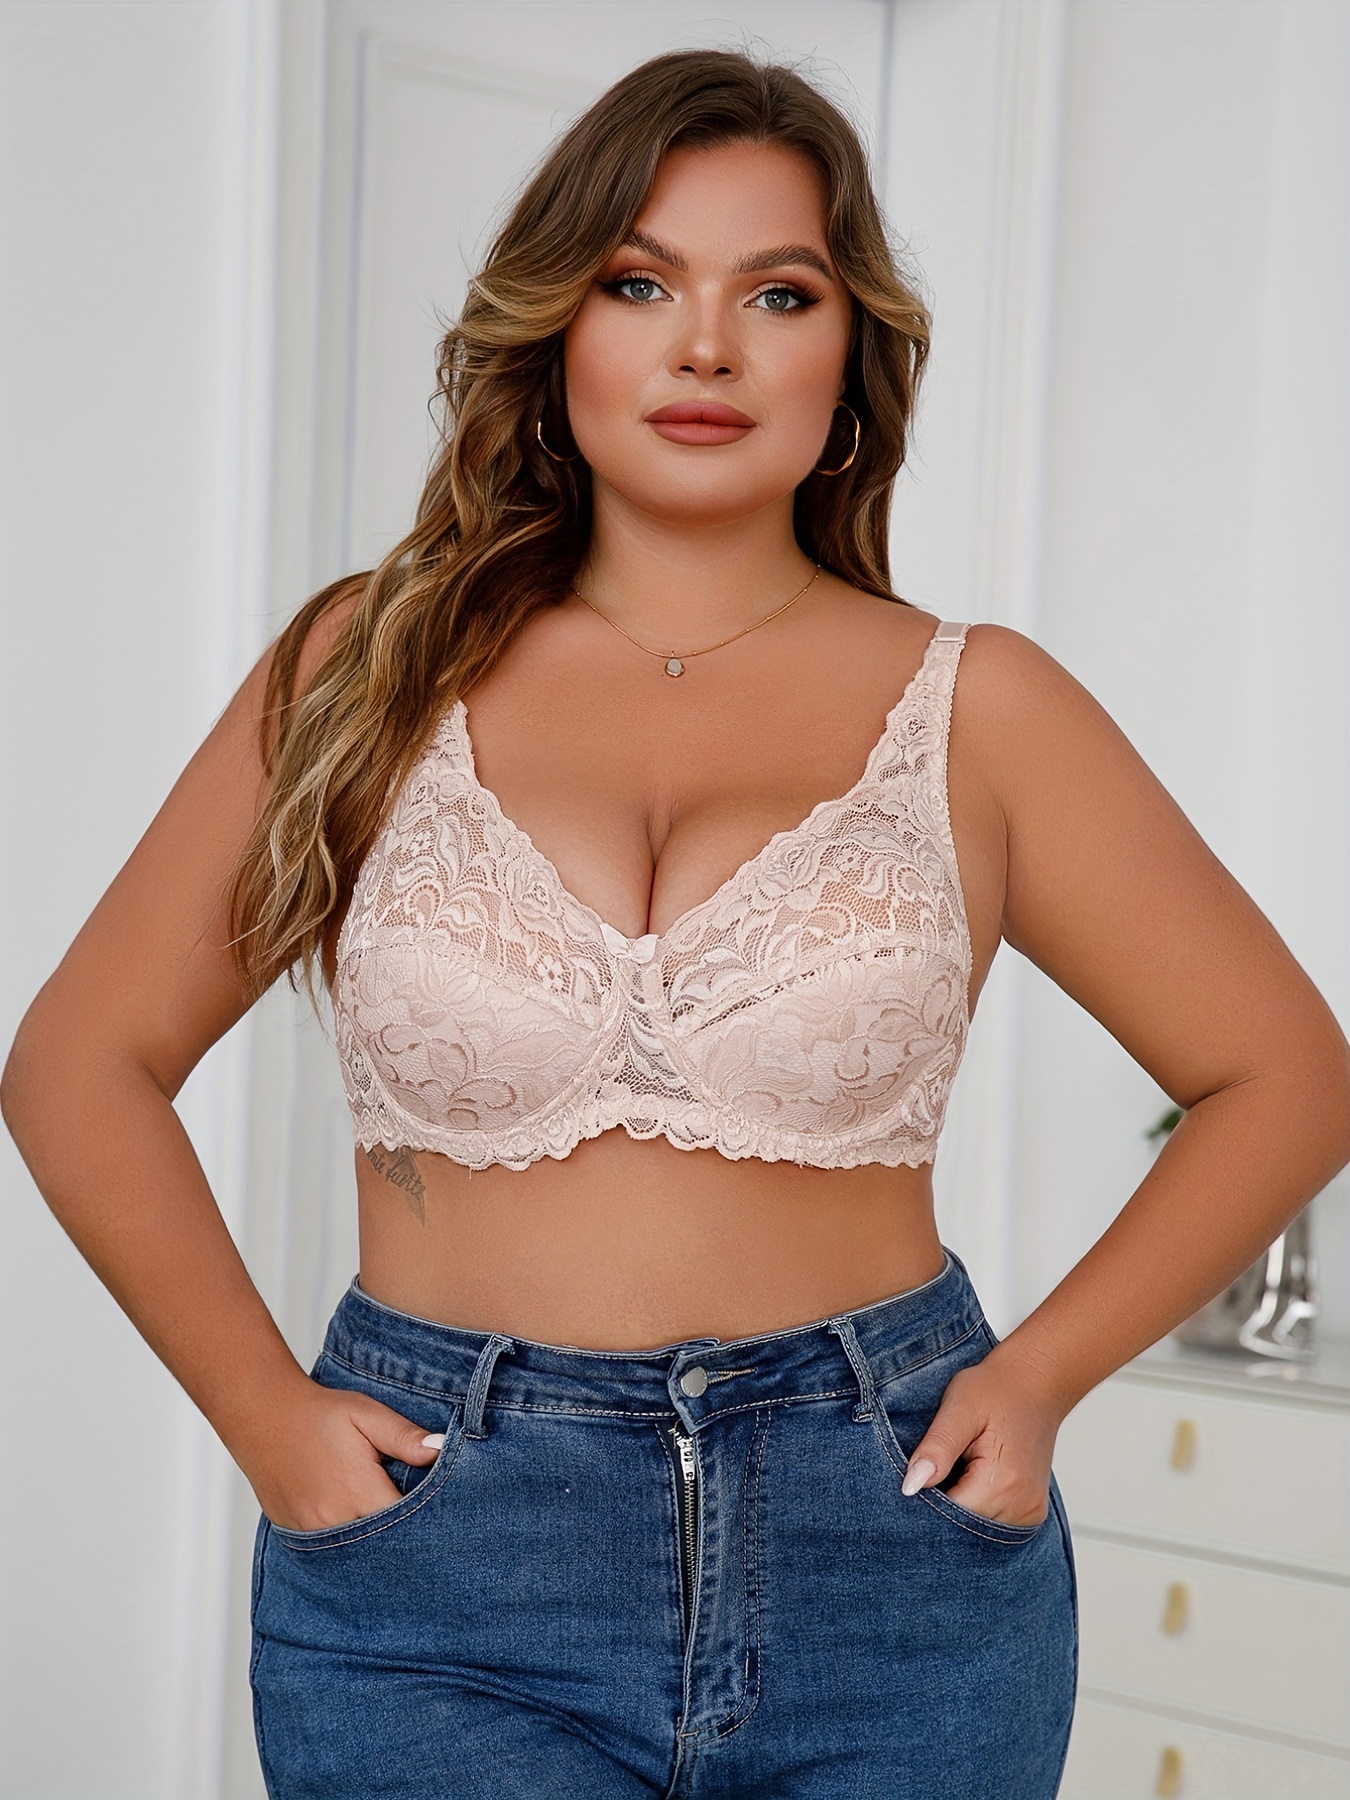  PJRYC Sexy Floral Lace Bra Wireless Lingerie 32-40 ABC Cup Plus  Size Bralette (Bands Size : 36C (80C), Color : Green) : Clothing, Shoes &  Jewelry